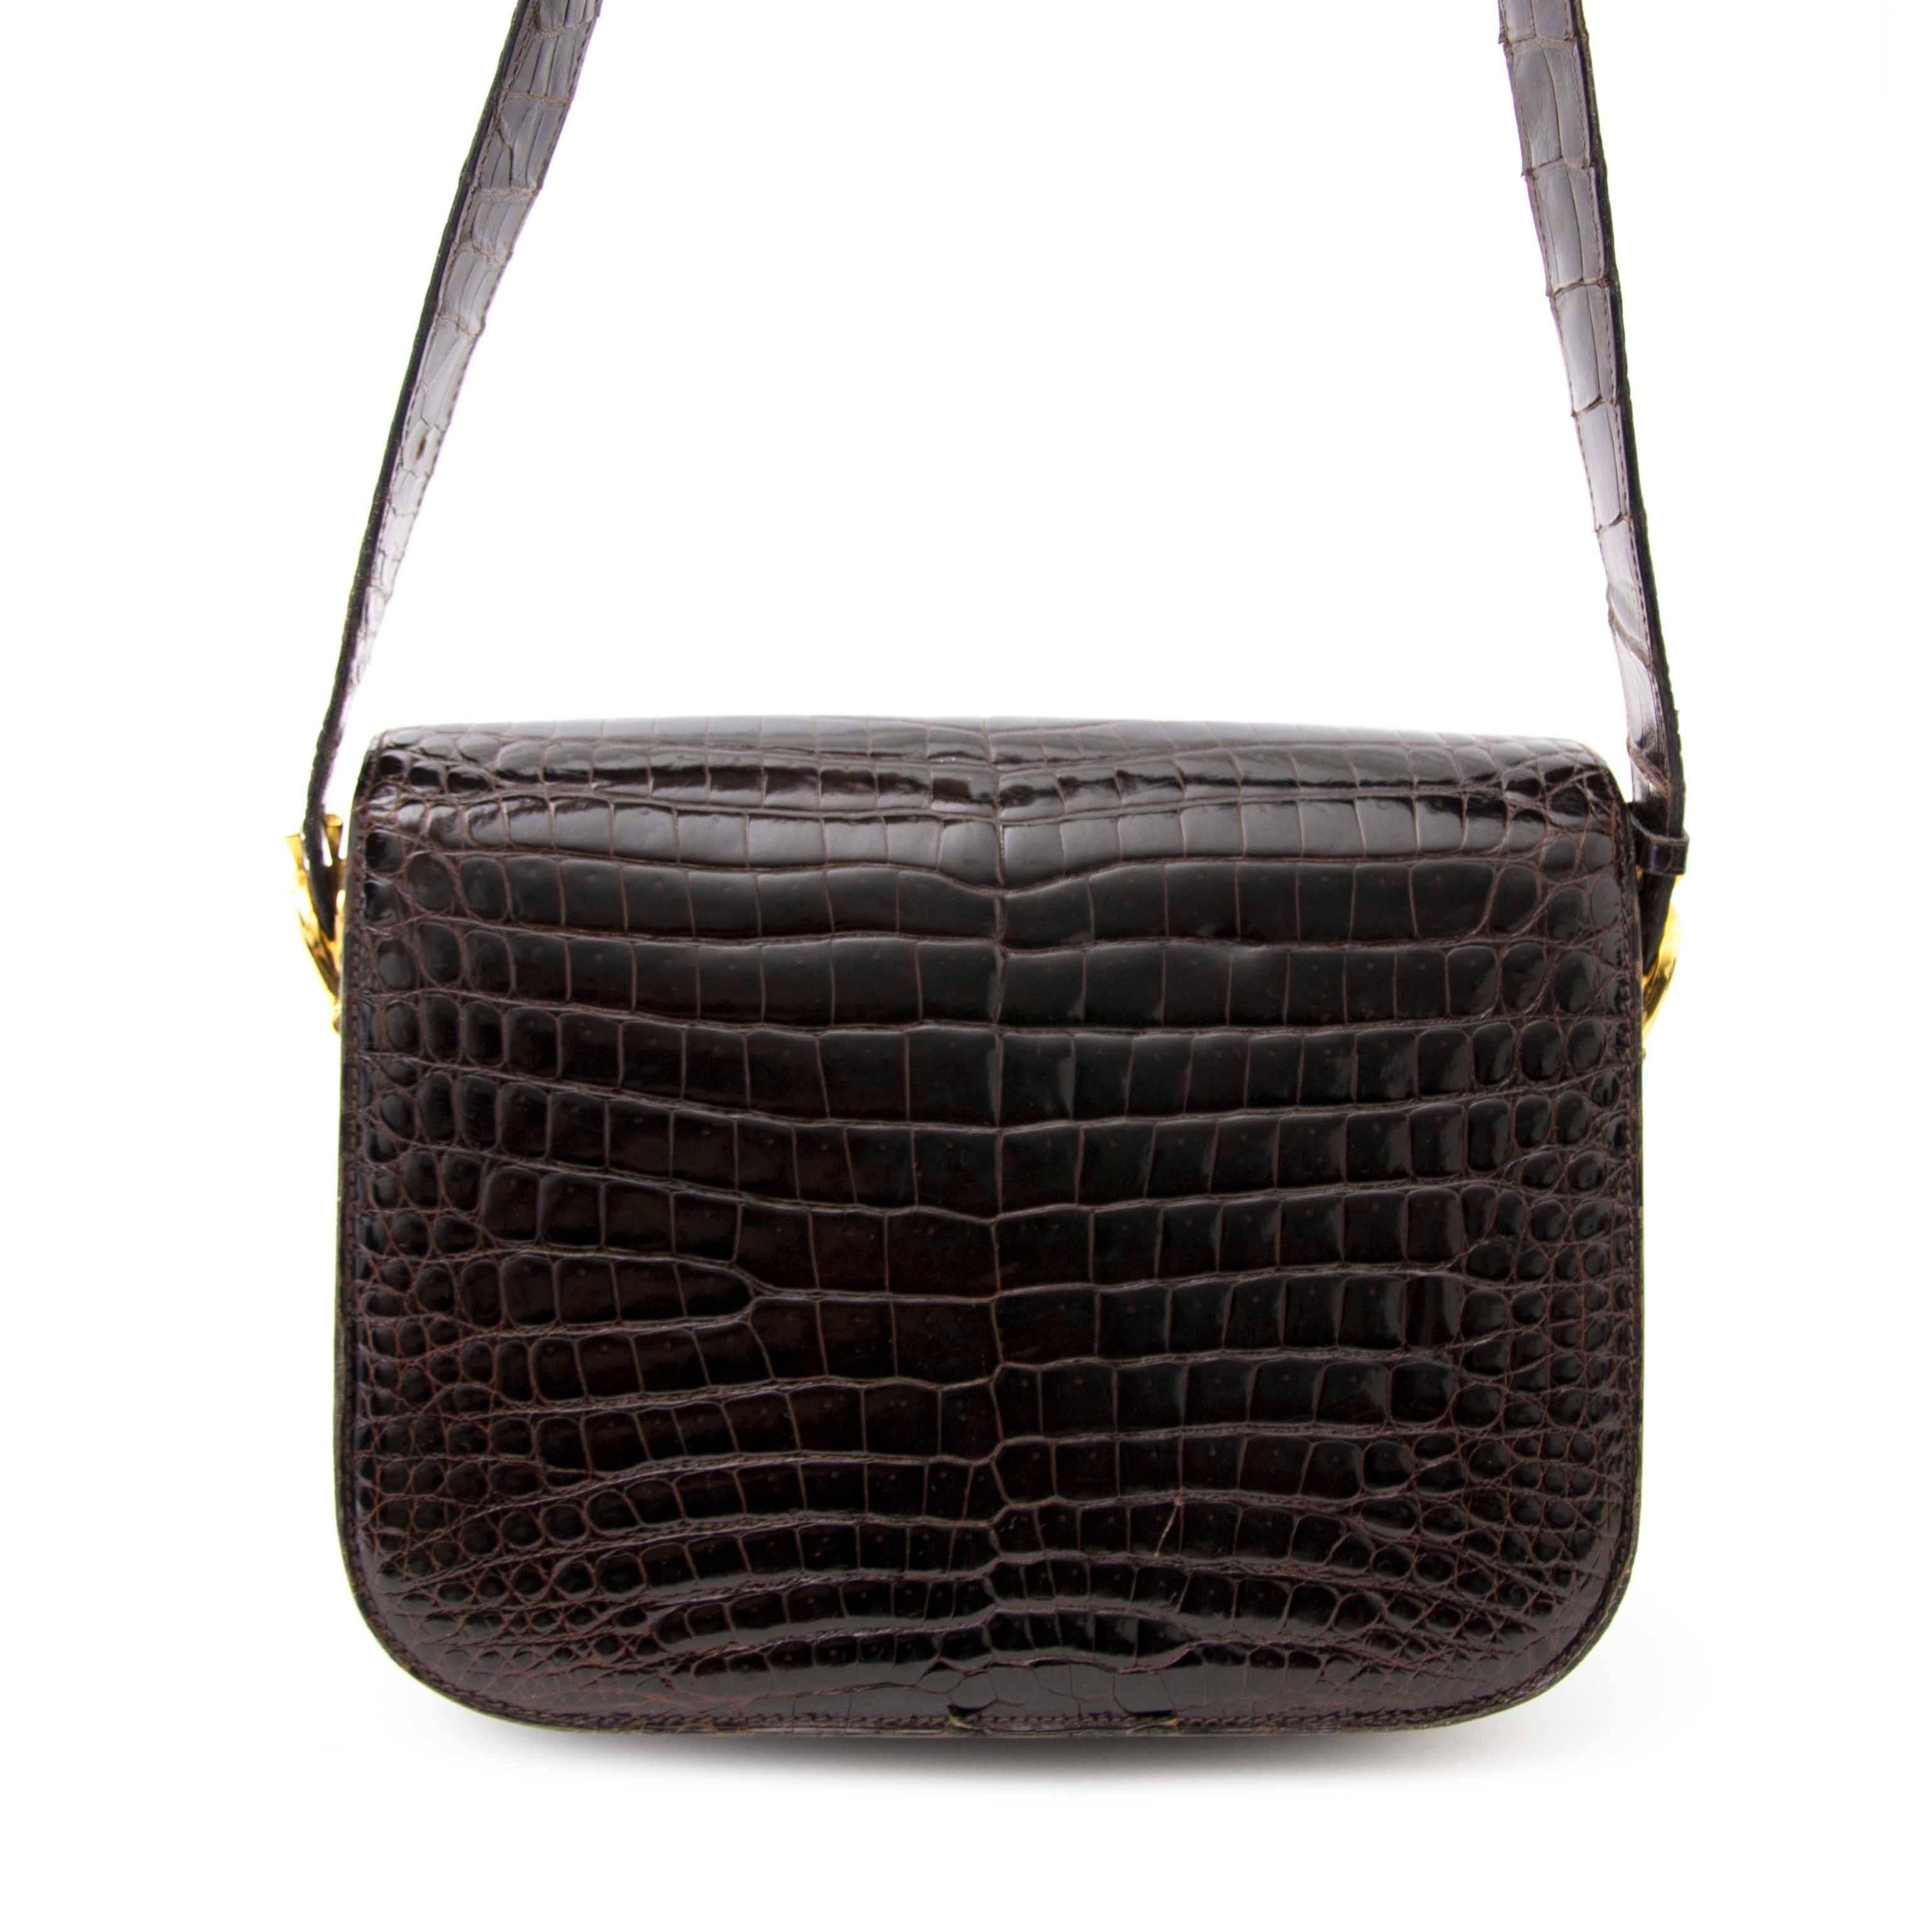 Up for offer today: this unique Céline vintage horse box bag crafted out of precious alligator skin.

Its rich brown color and gold toned clasp and hardware add to the luxuriousness of this bag.

The bag closes by sliding the front flap inside the